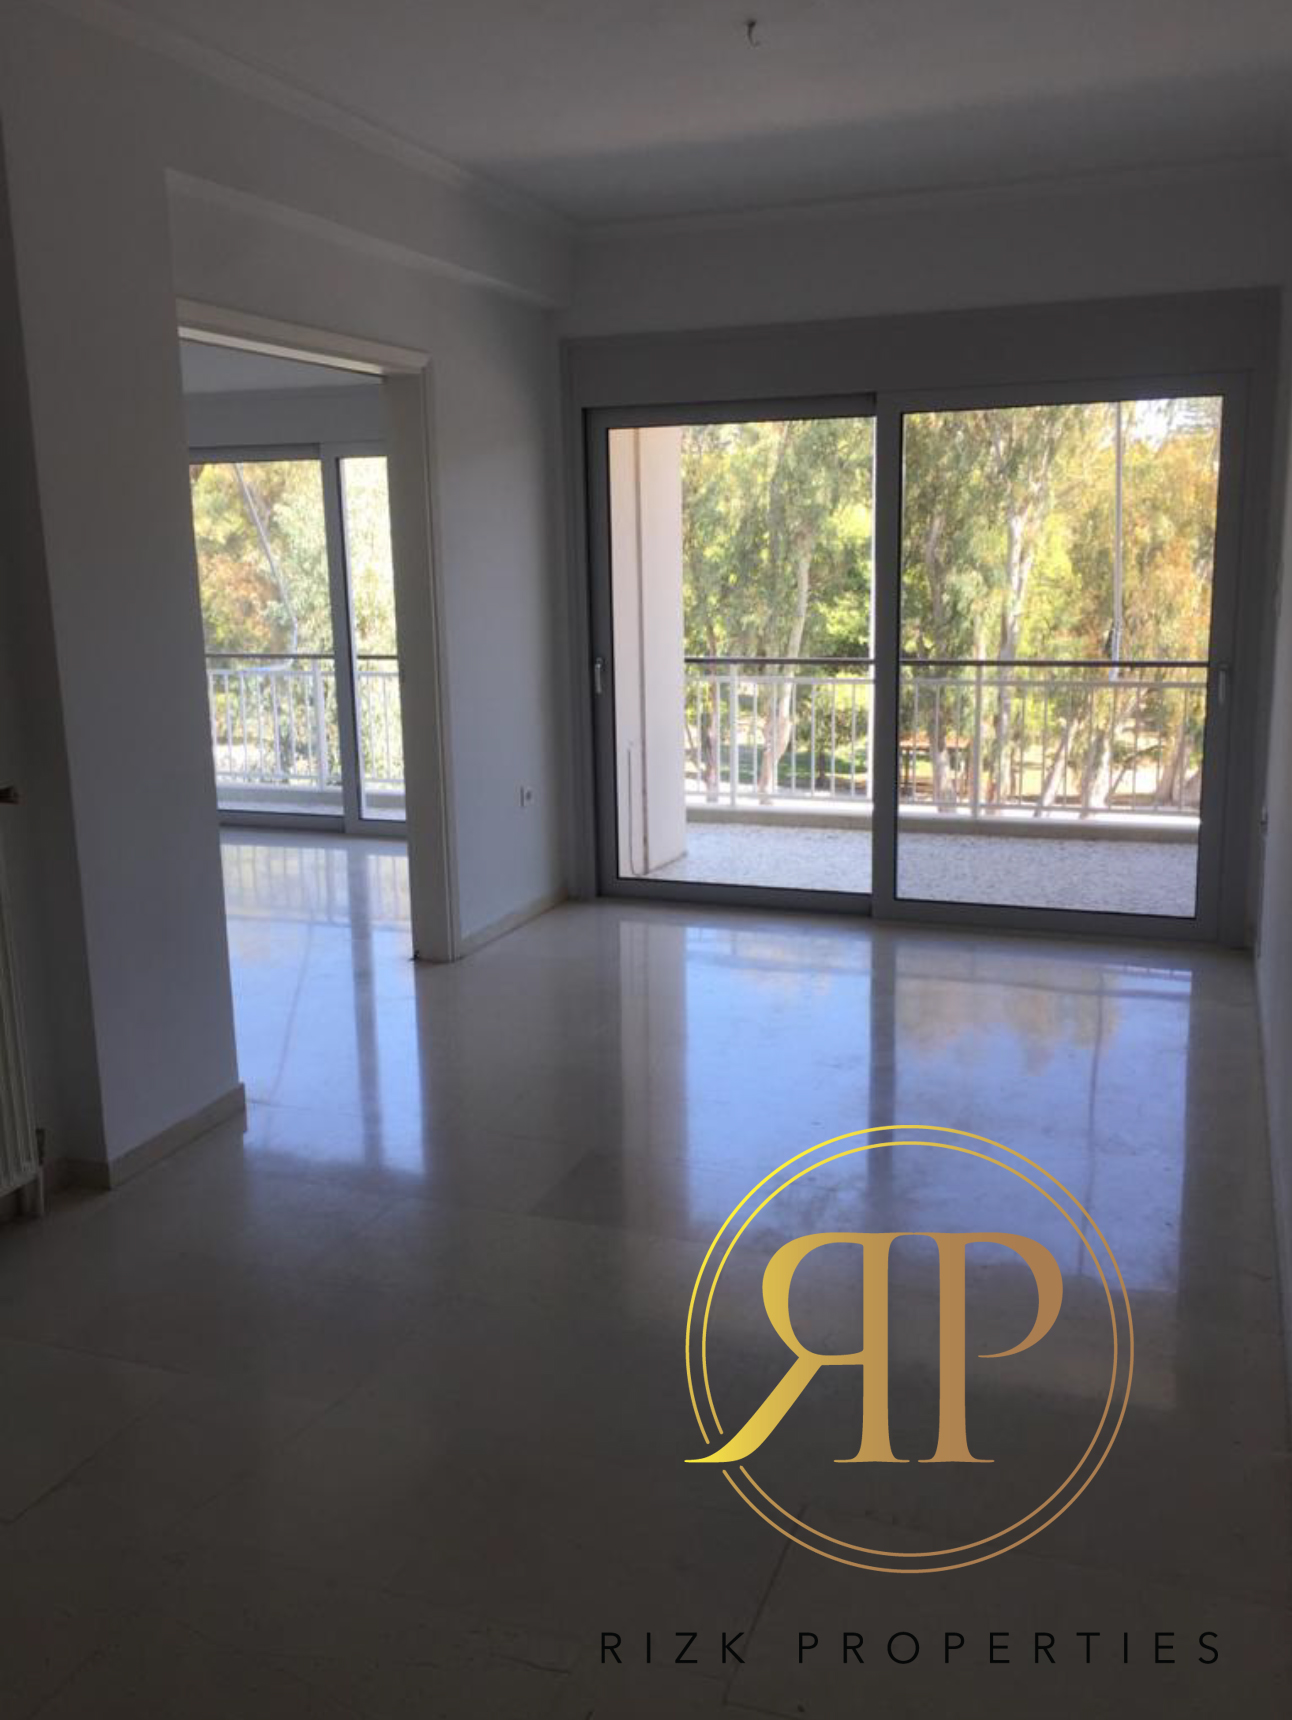 Apartment in the heart of the Athenian Riviera, Vouliagmeni